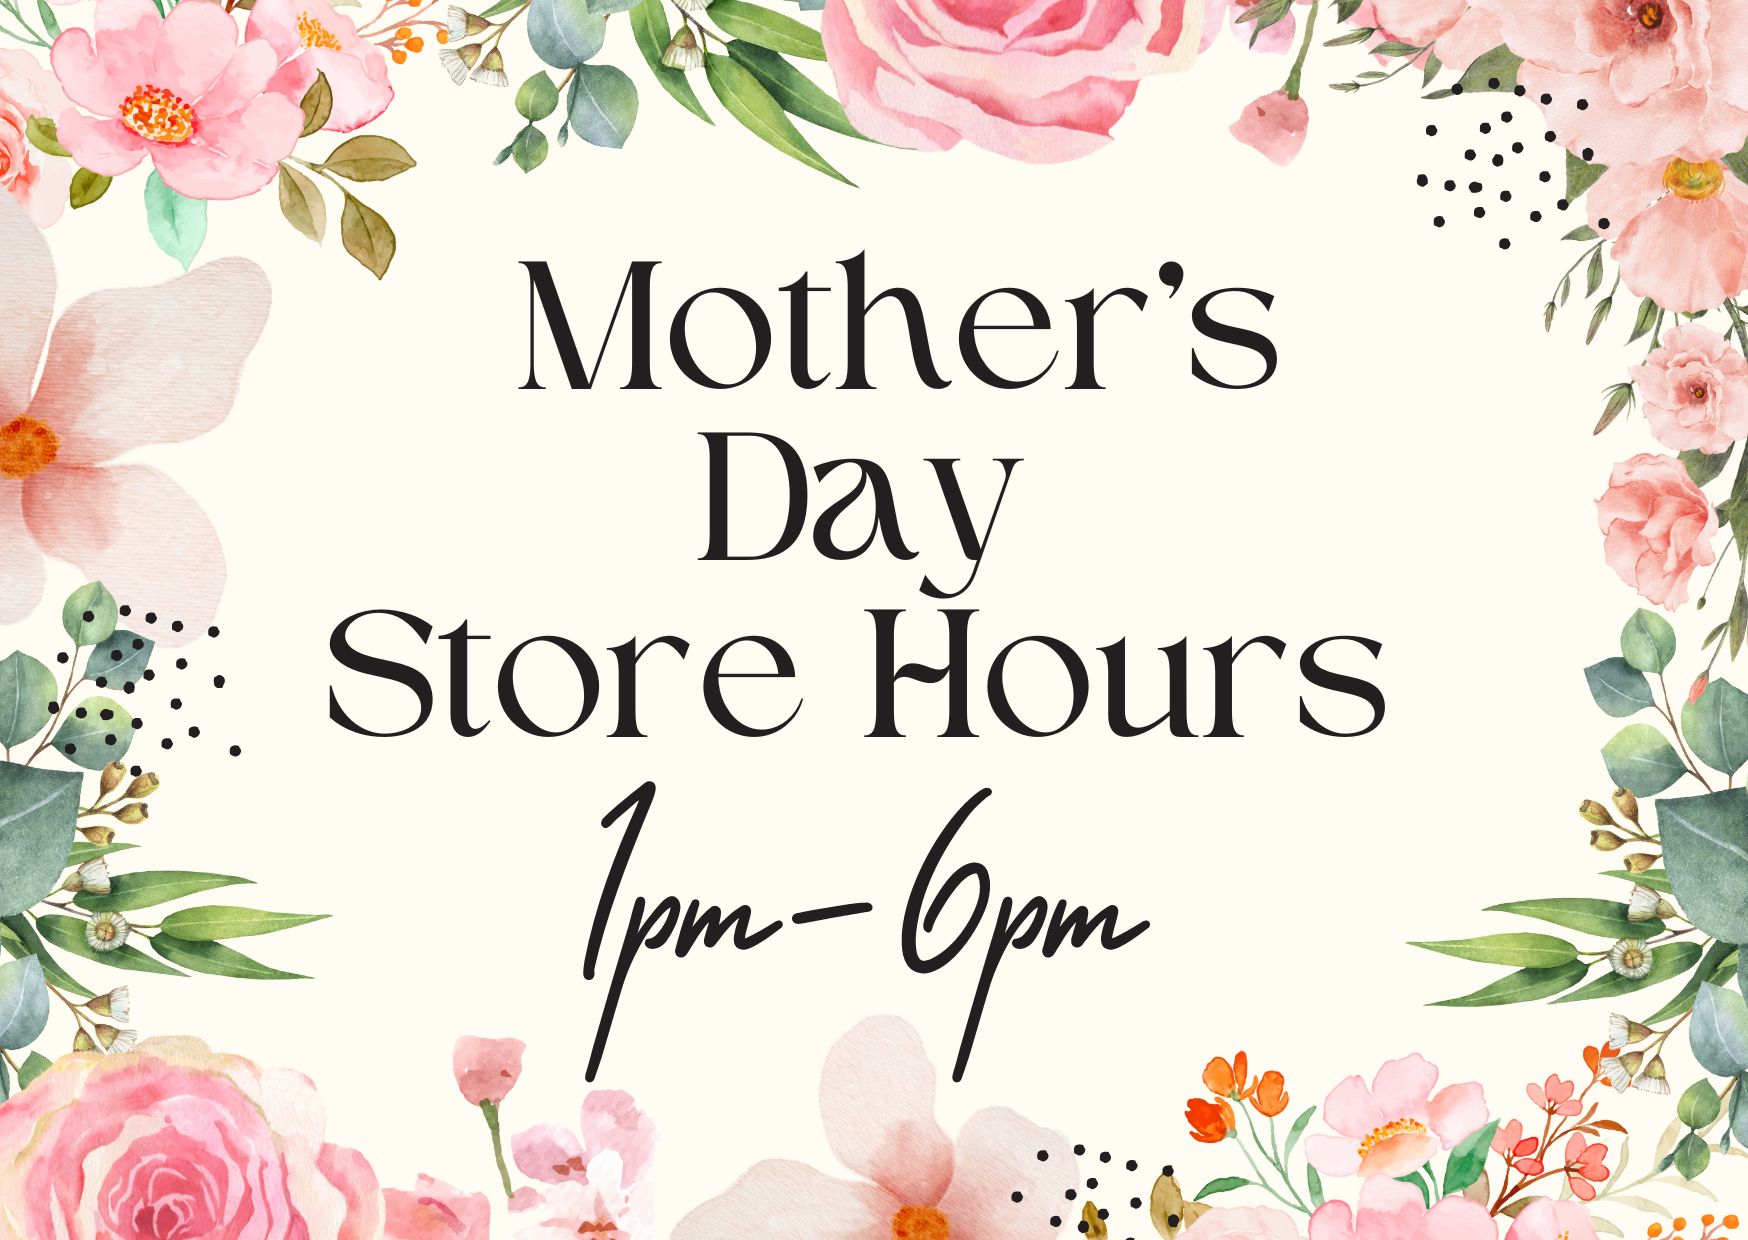 Mother's Day Store Hours